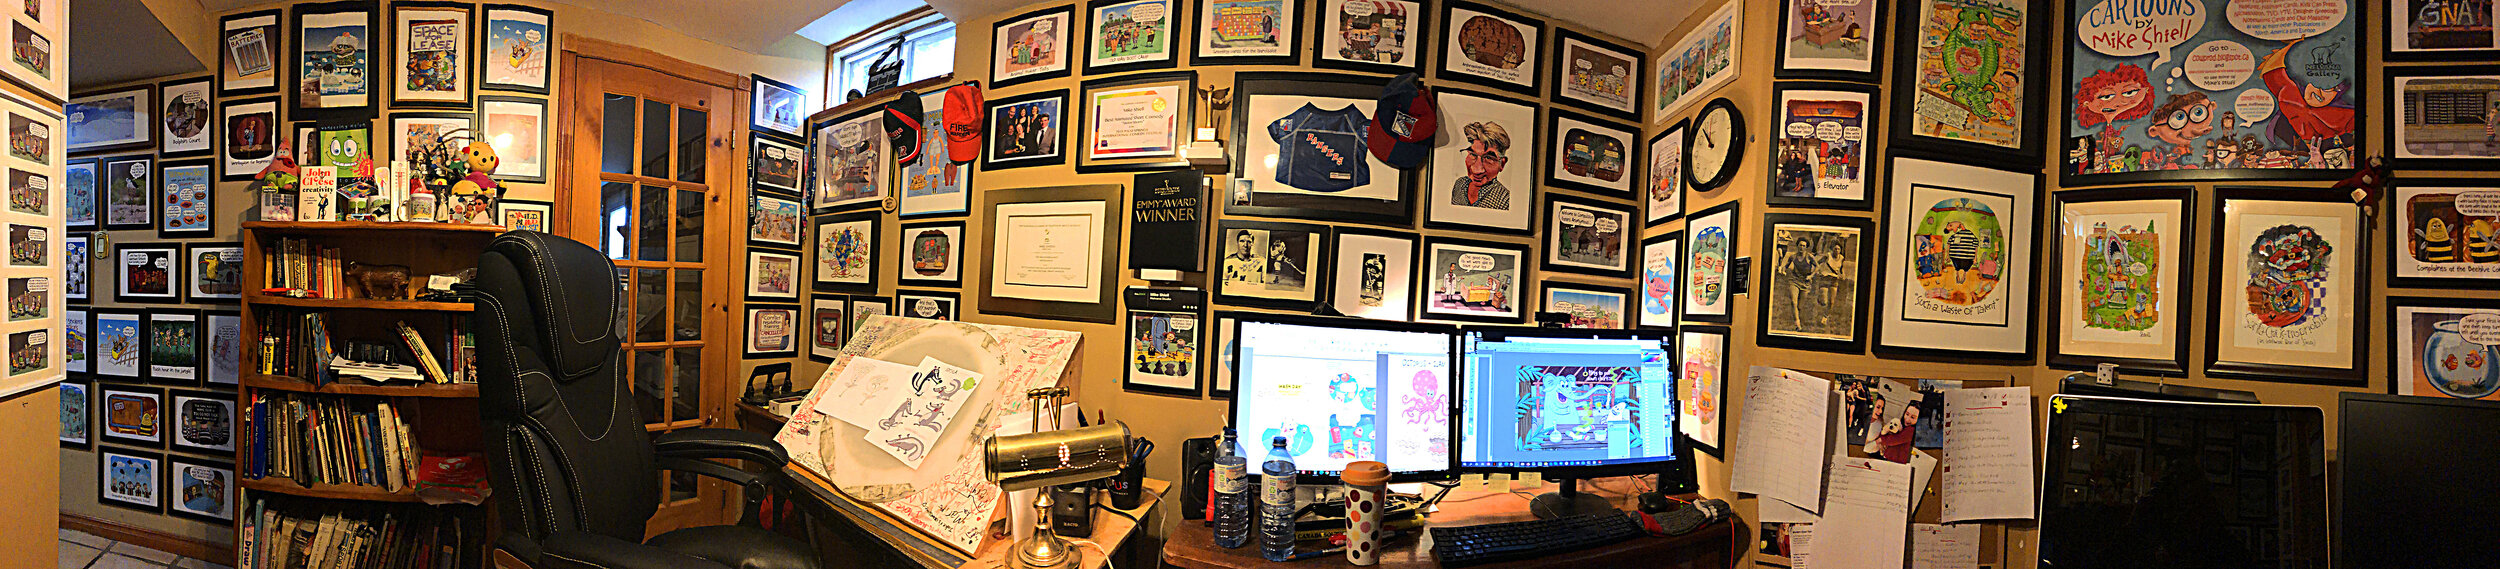 Mike Shiell's office full of art, action and cartoons and awards and dogs.